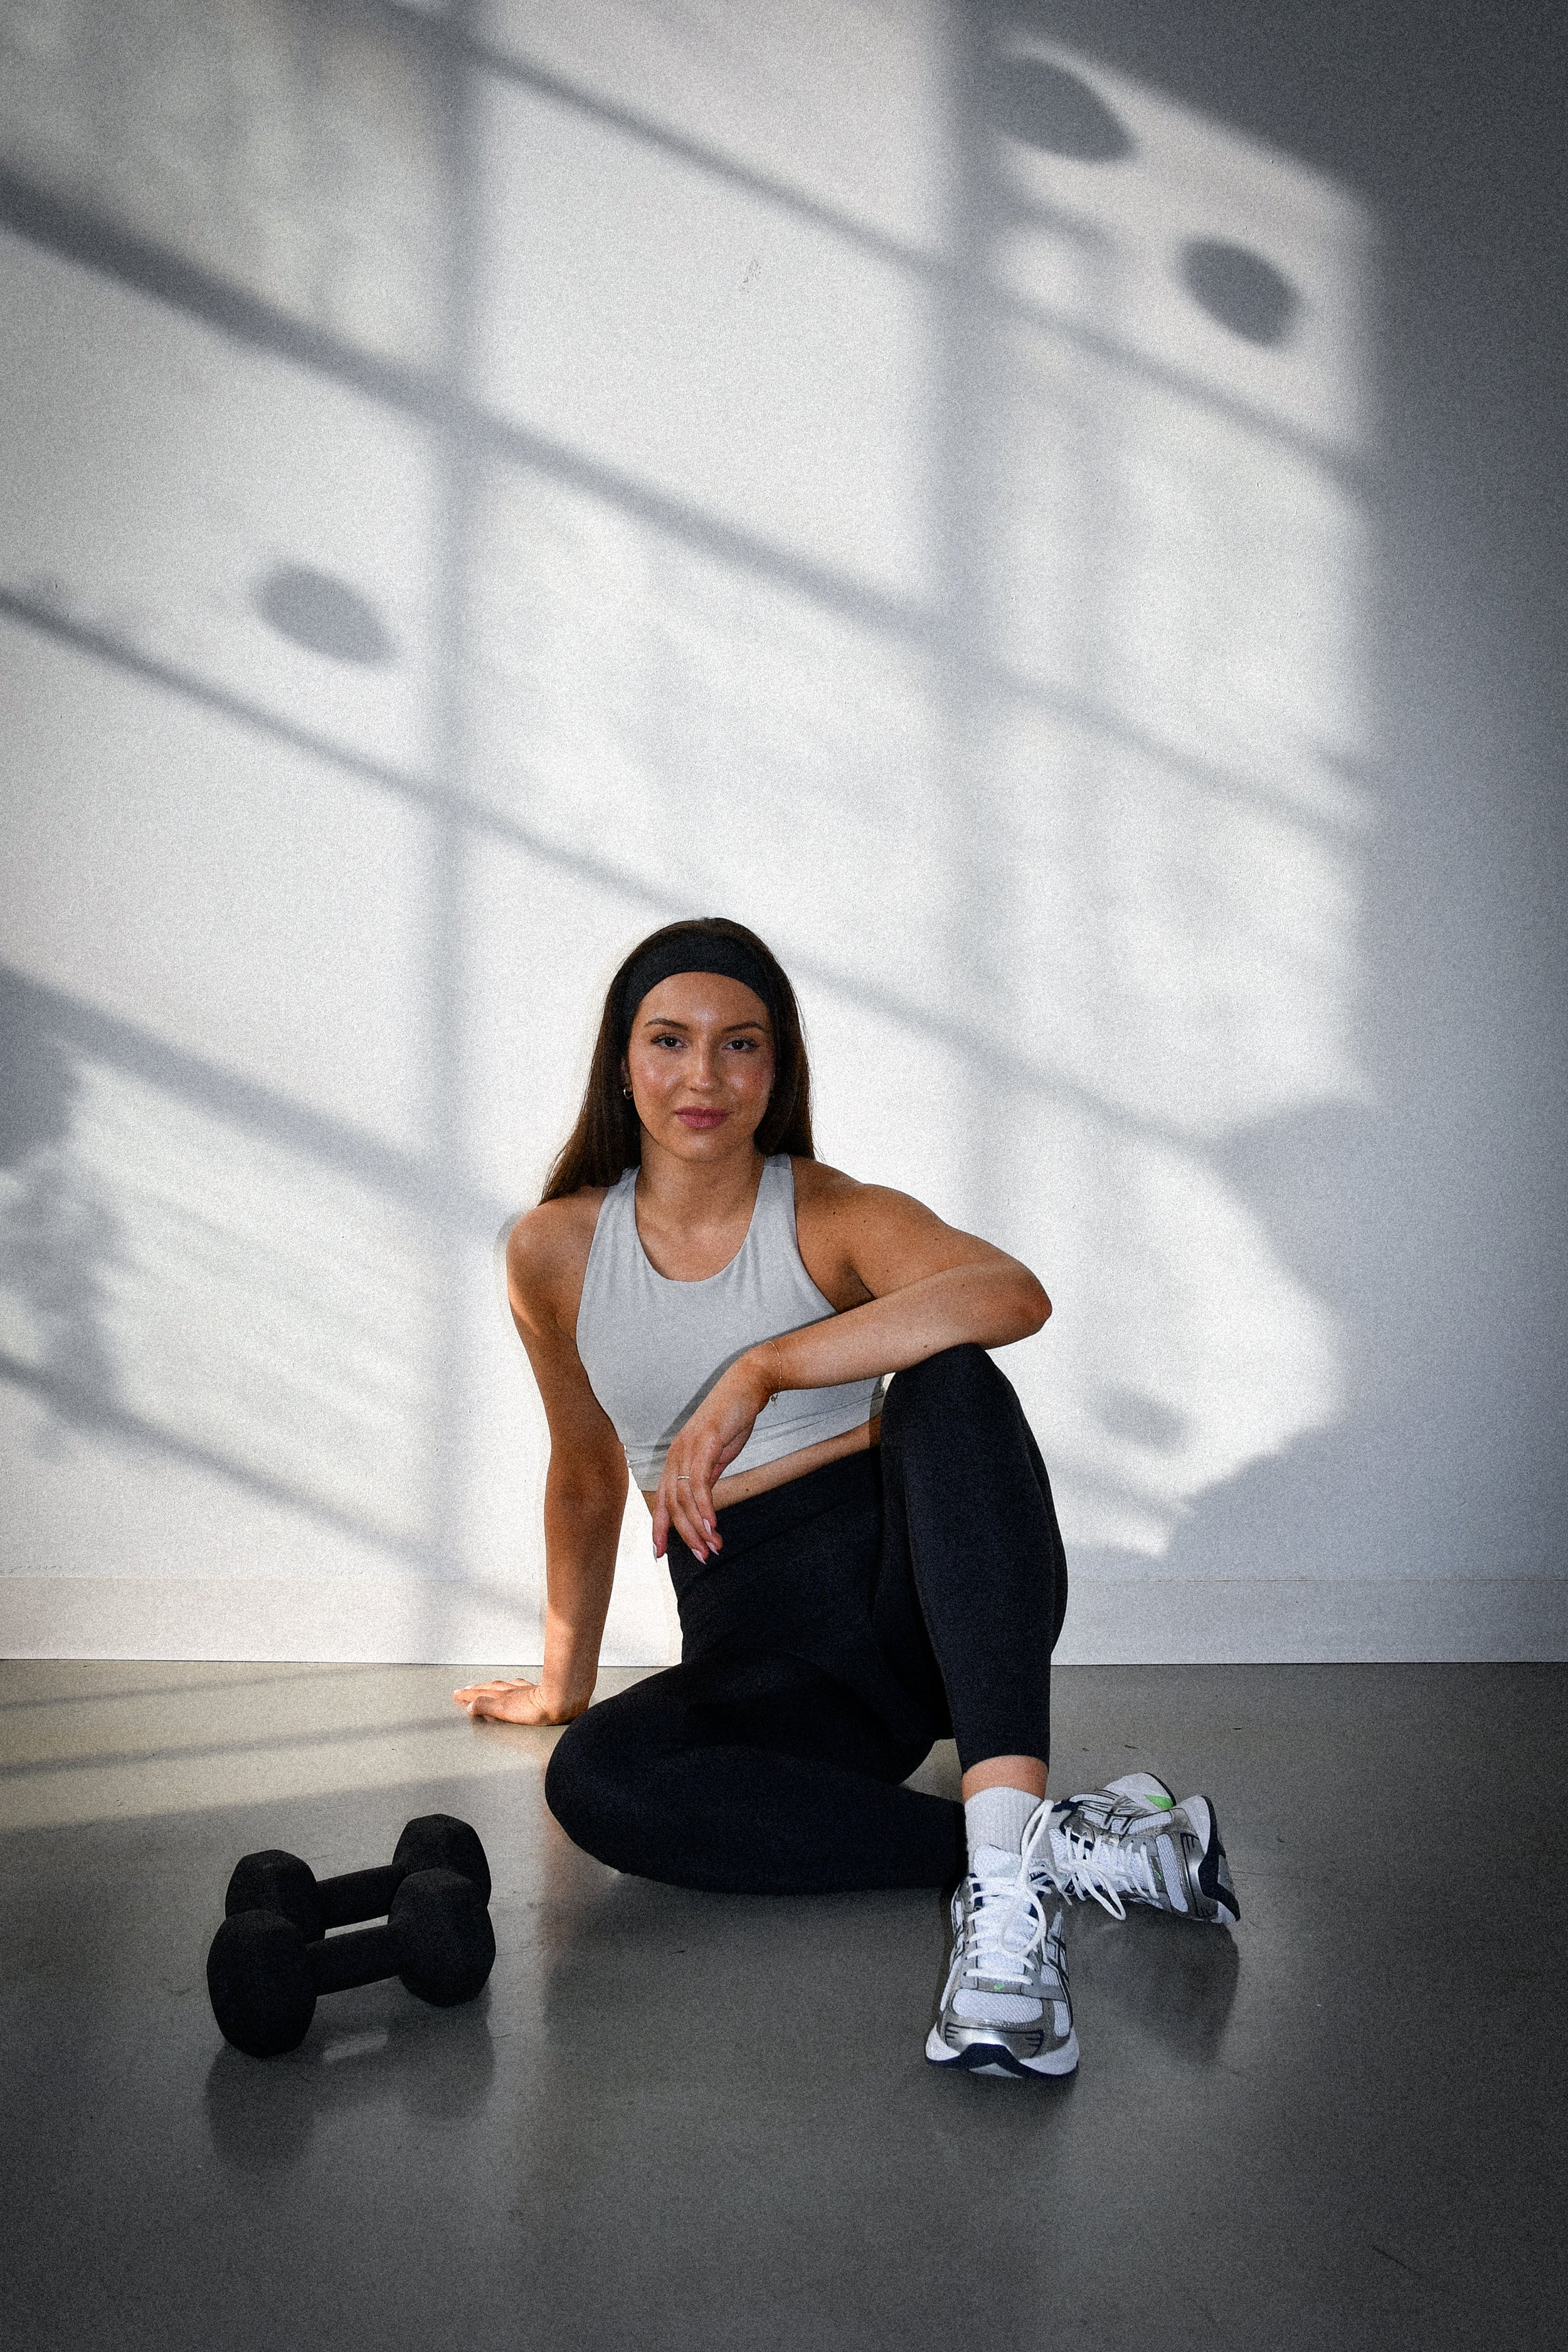 WOMEN'S PERSONAL TRAINER IN TORONTO — MELROSE TRAINING